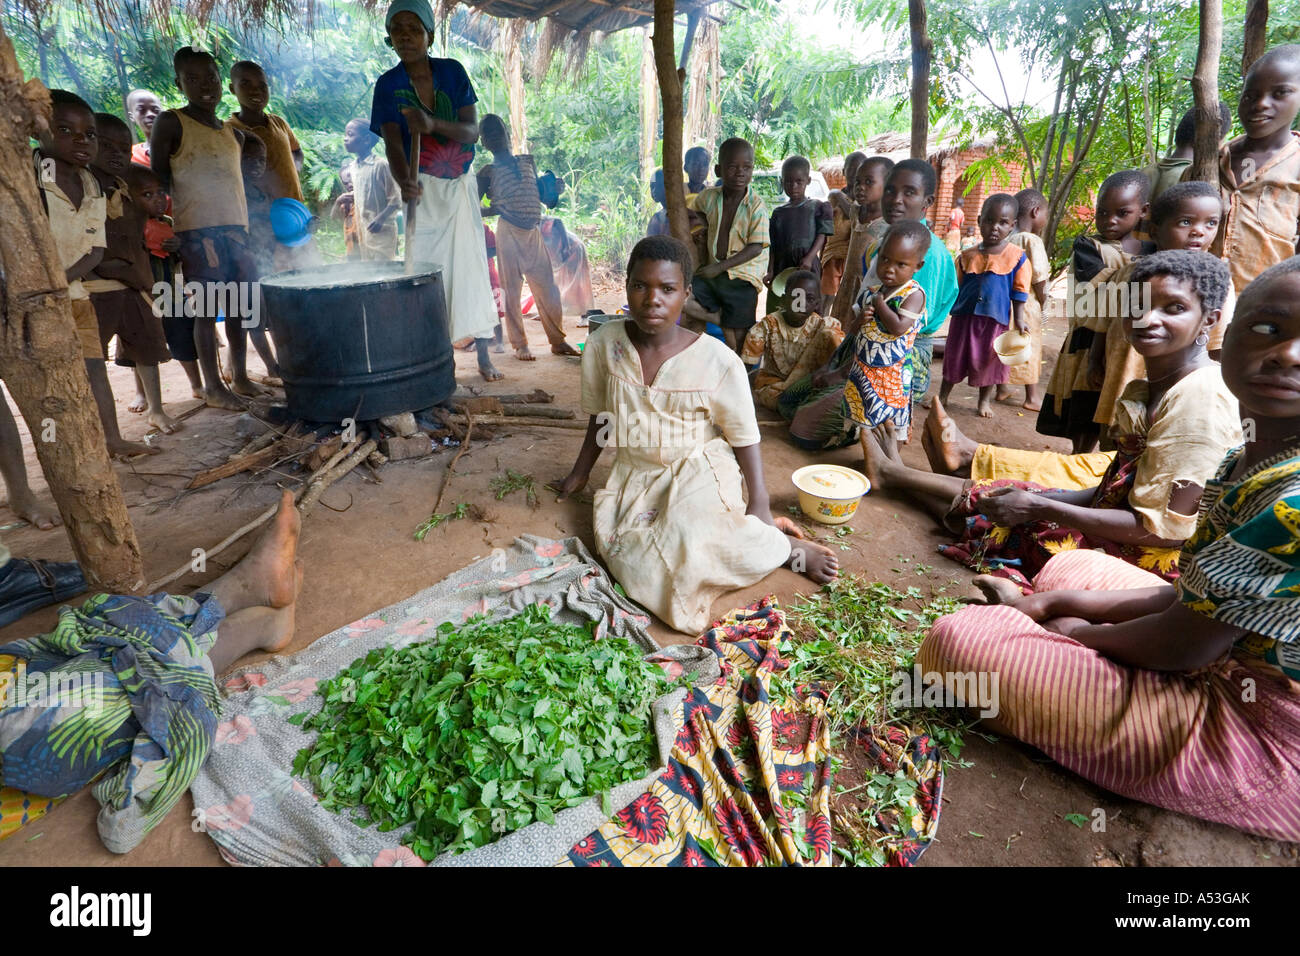 Cooking phala as part of the Joseph Project feeding programme in the village of Lombwa, Malawi, Africa Stock Photo